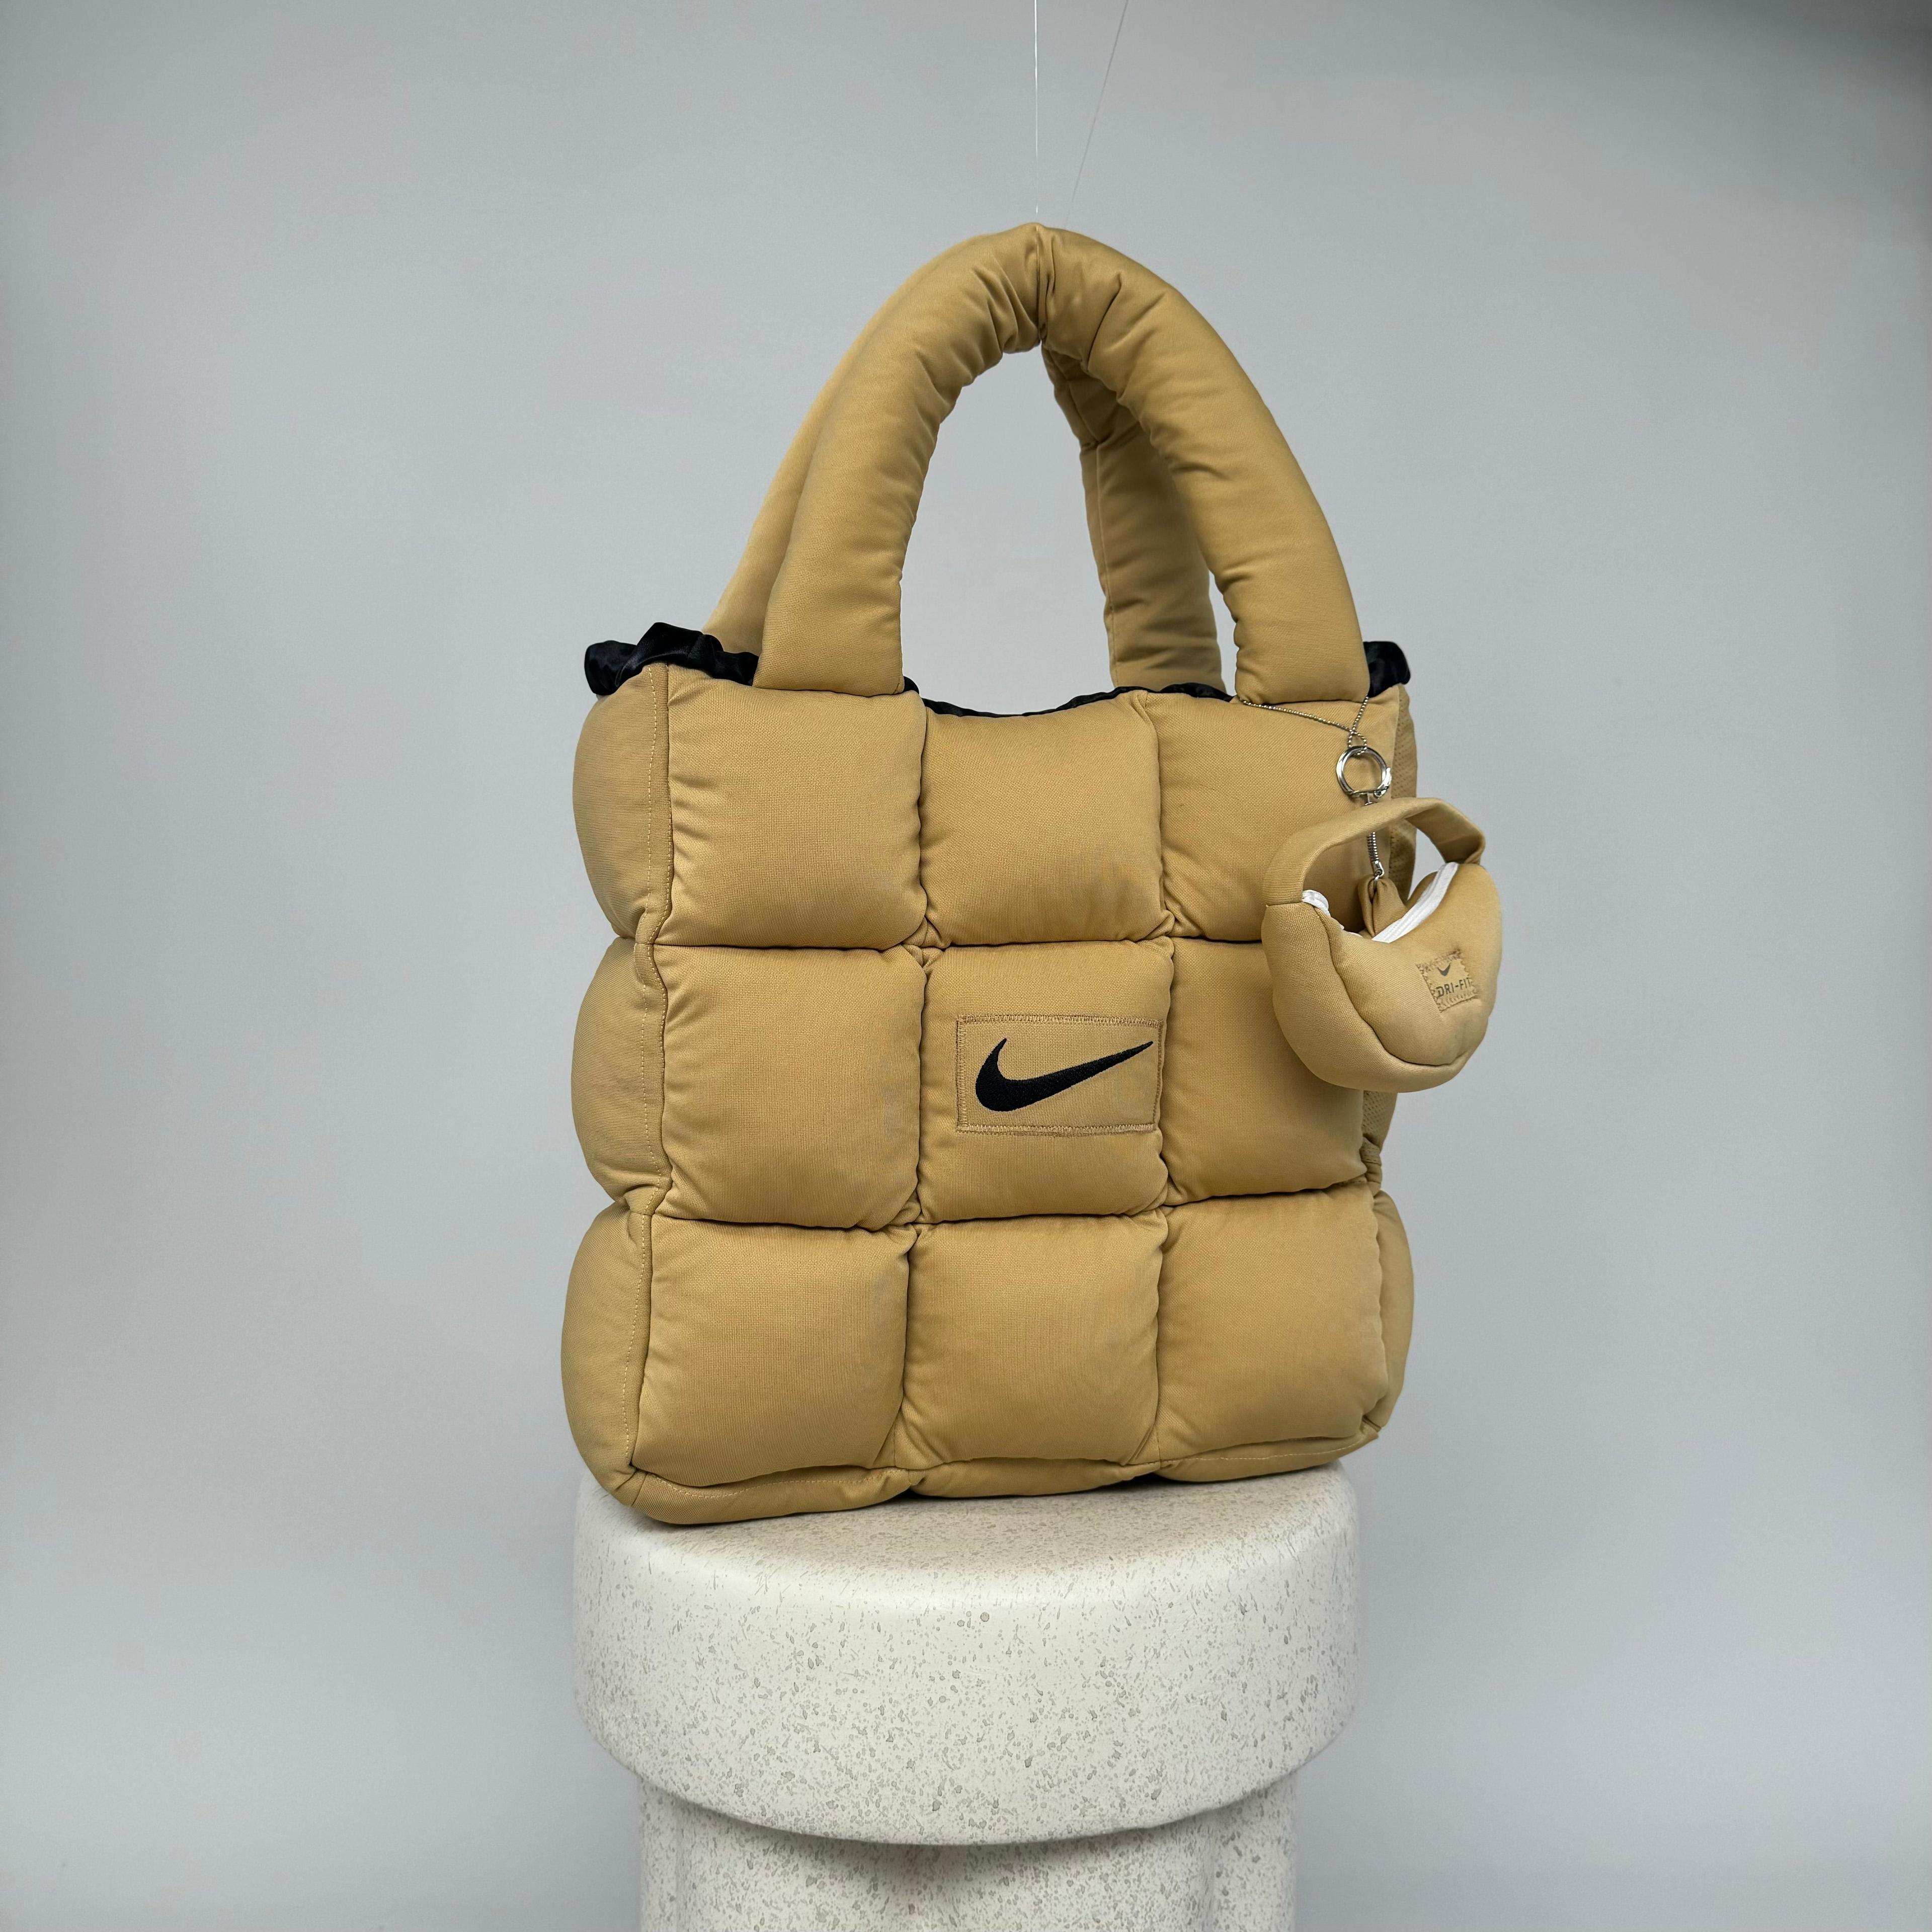 Boss Up Gold Puffer Bag with Mini Bag